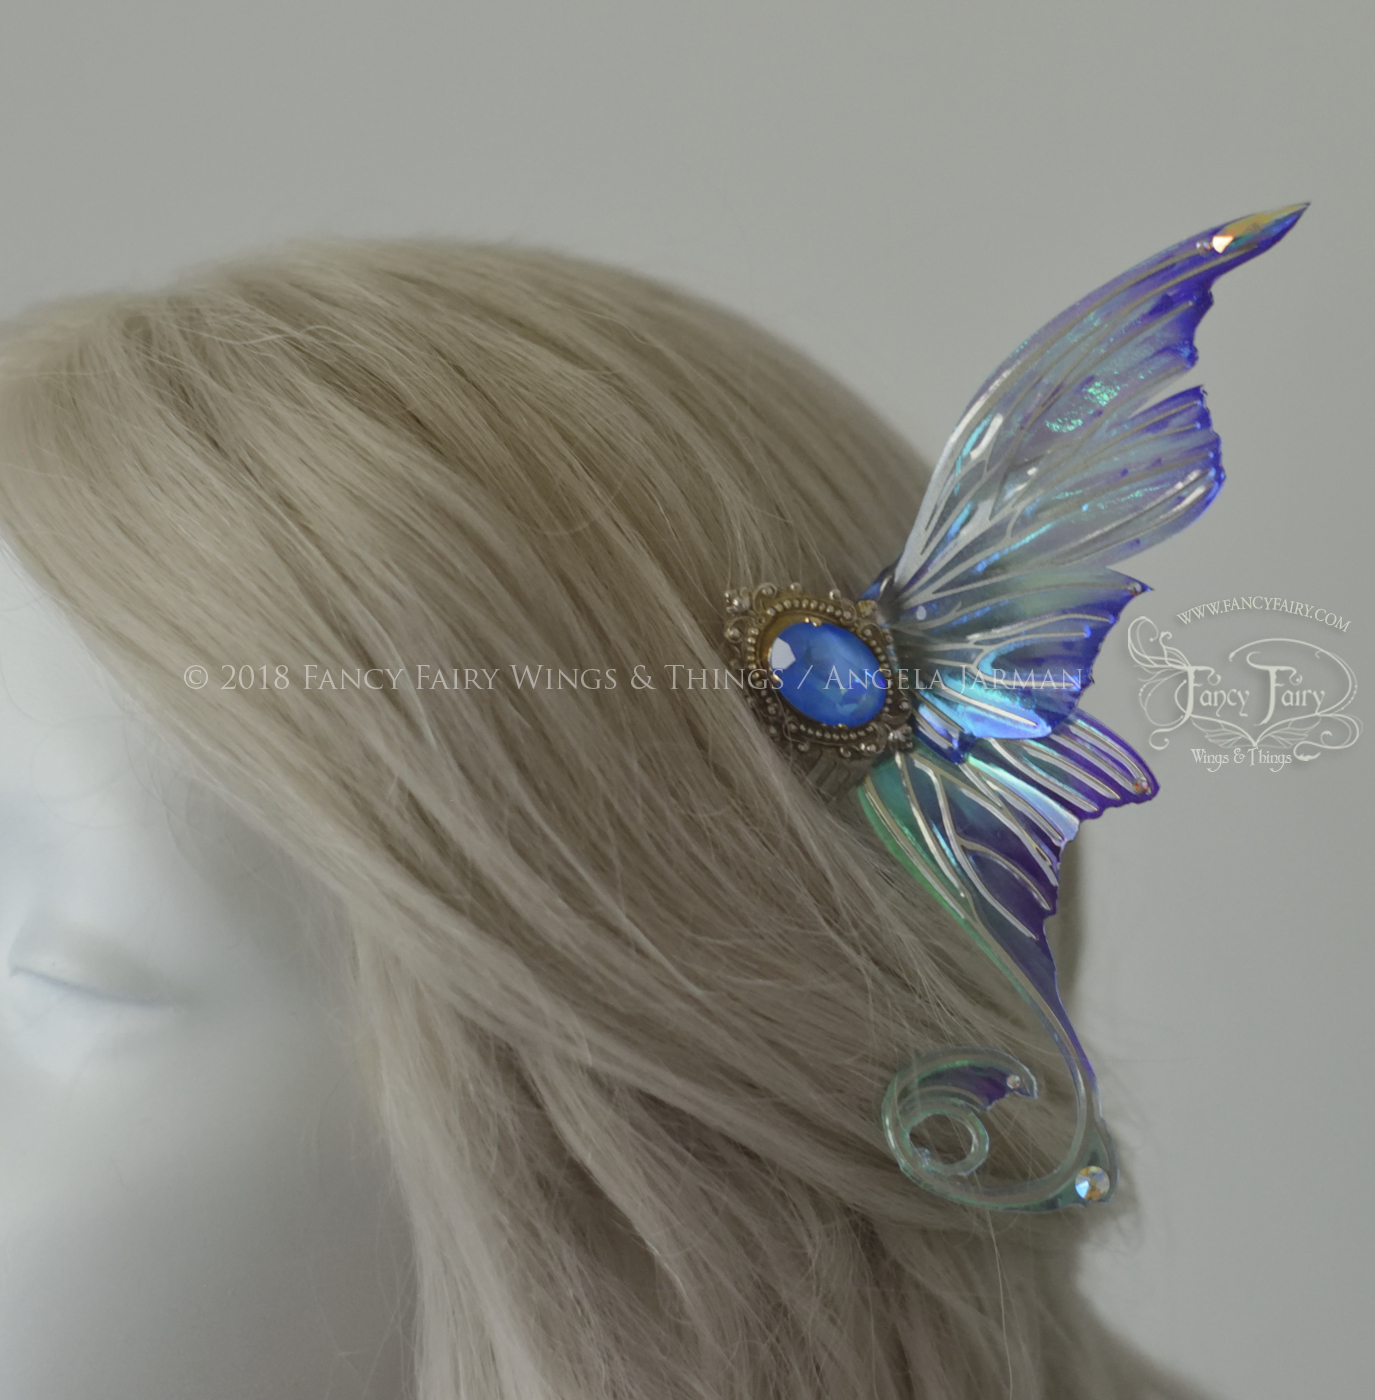 Aphrodite 3 and 1/2 inch Oceanic Fairy Wing Hair Combs with Silver Veins